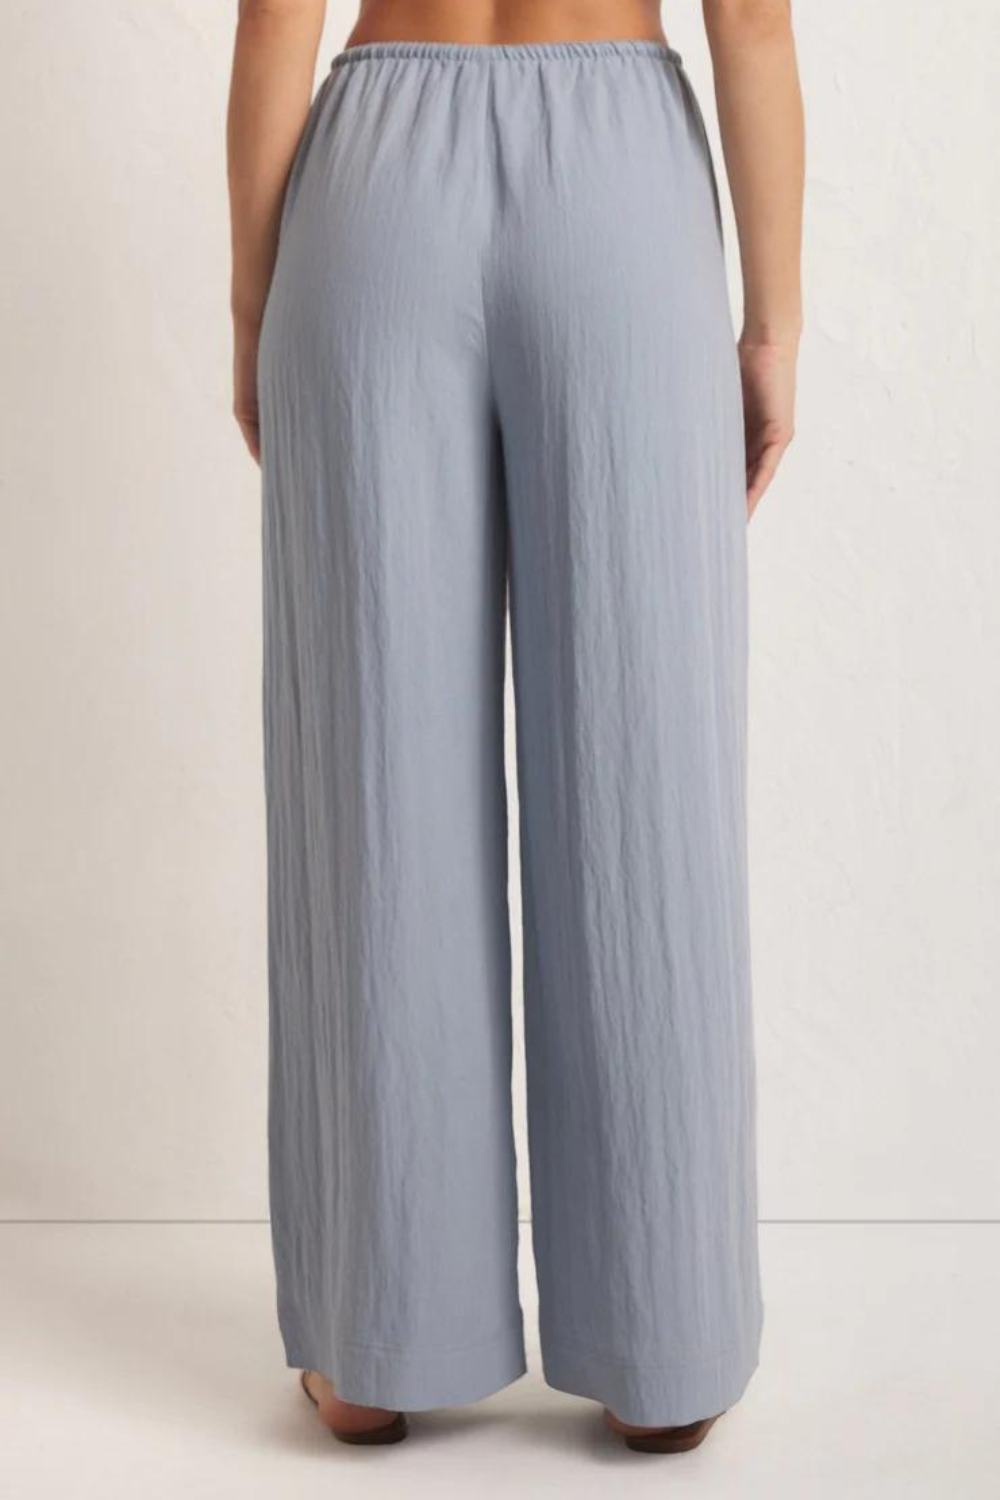 Z Supply Soleil Pants - Stormy